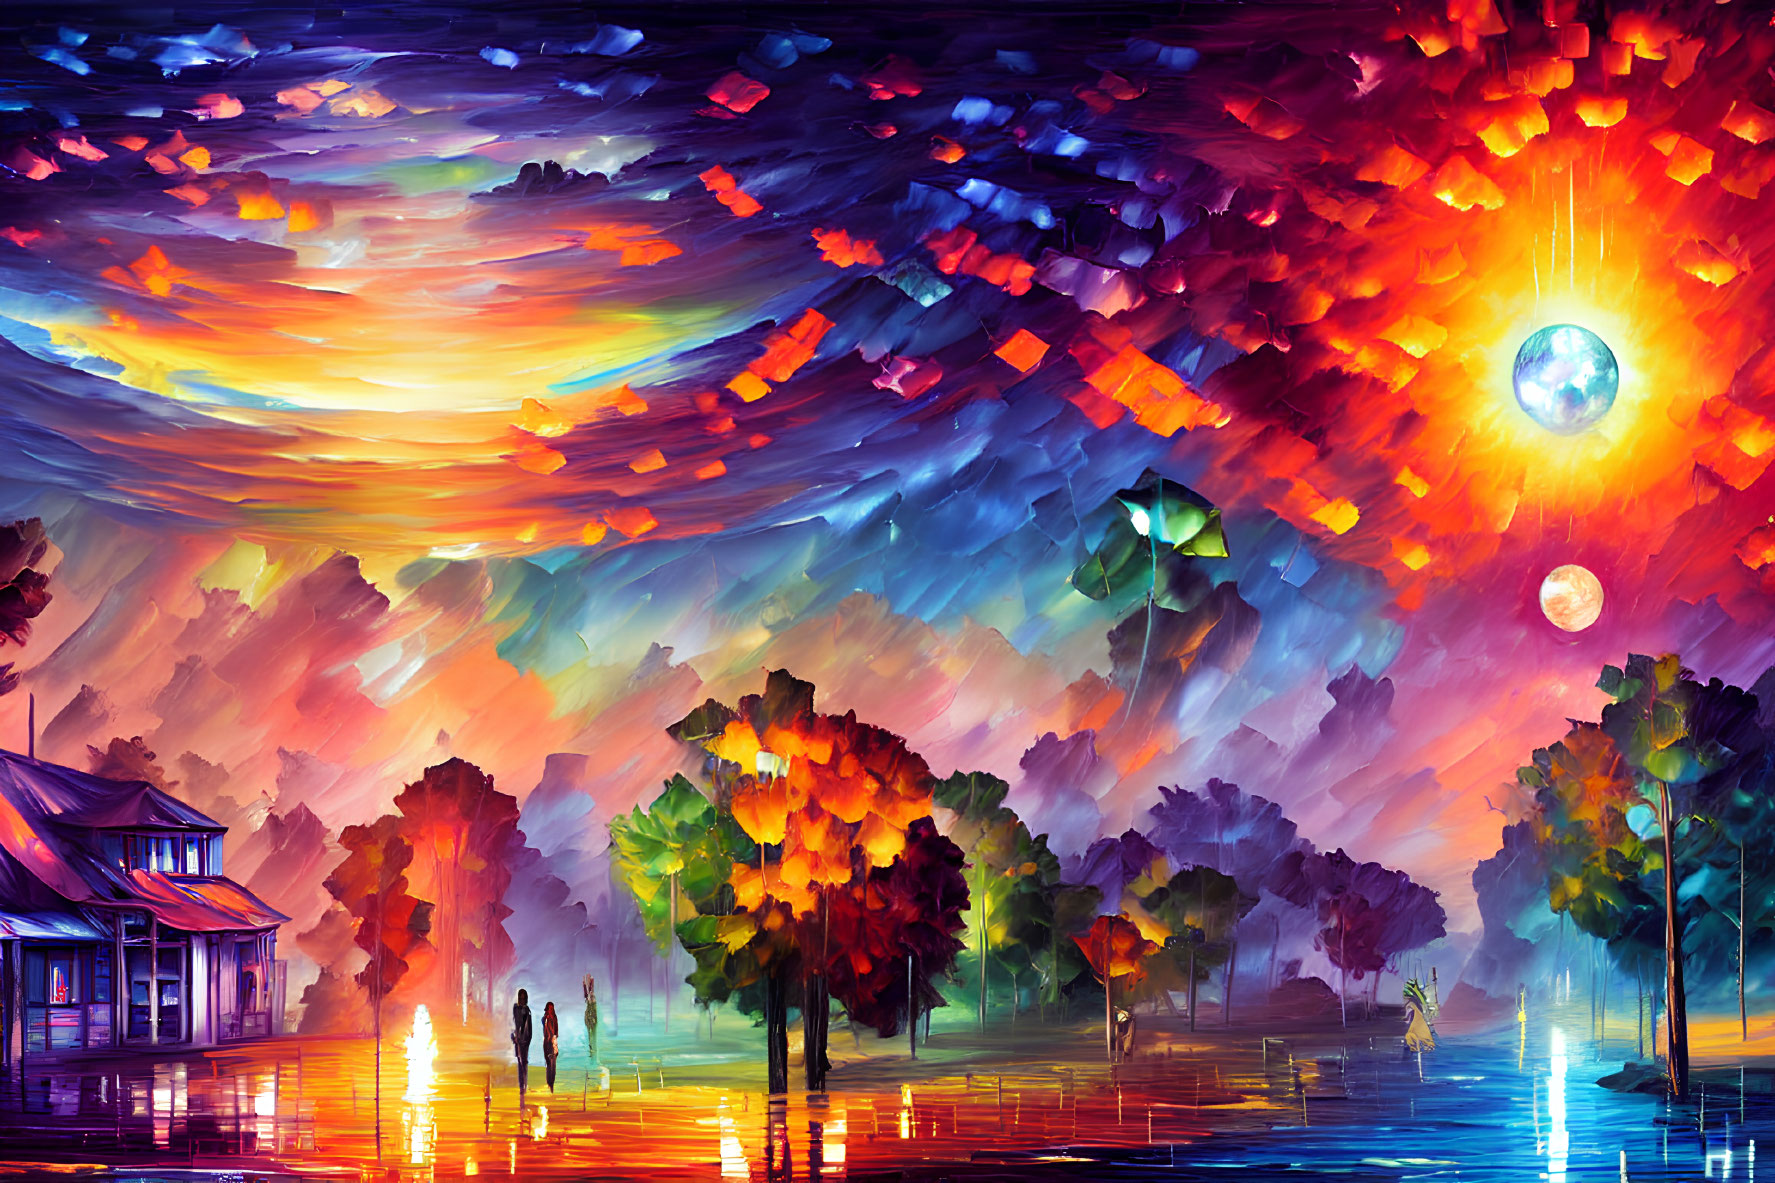 Colorful surreal landscape with figures walking under tree, house near water